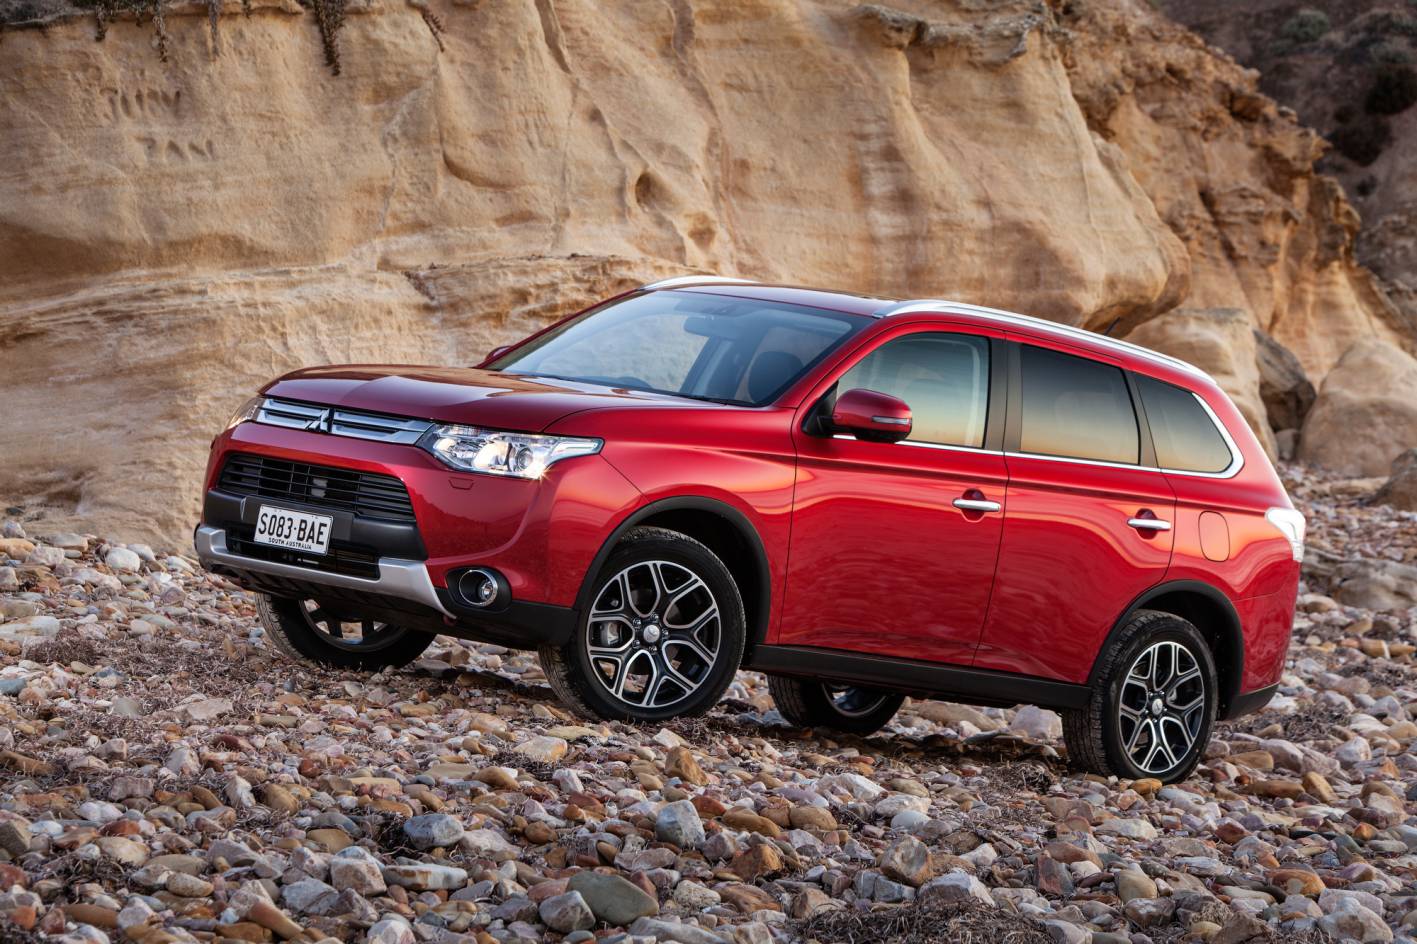 MY14.5 Mitsubishi Outlander on sale from $27,740